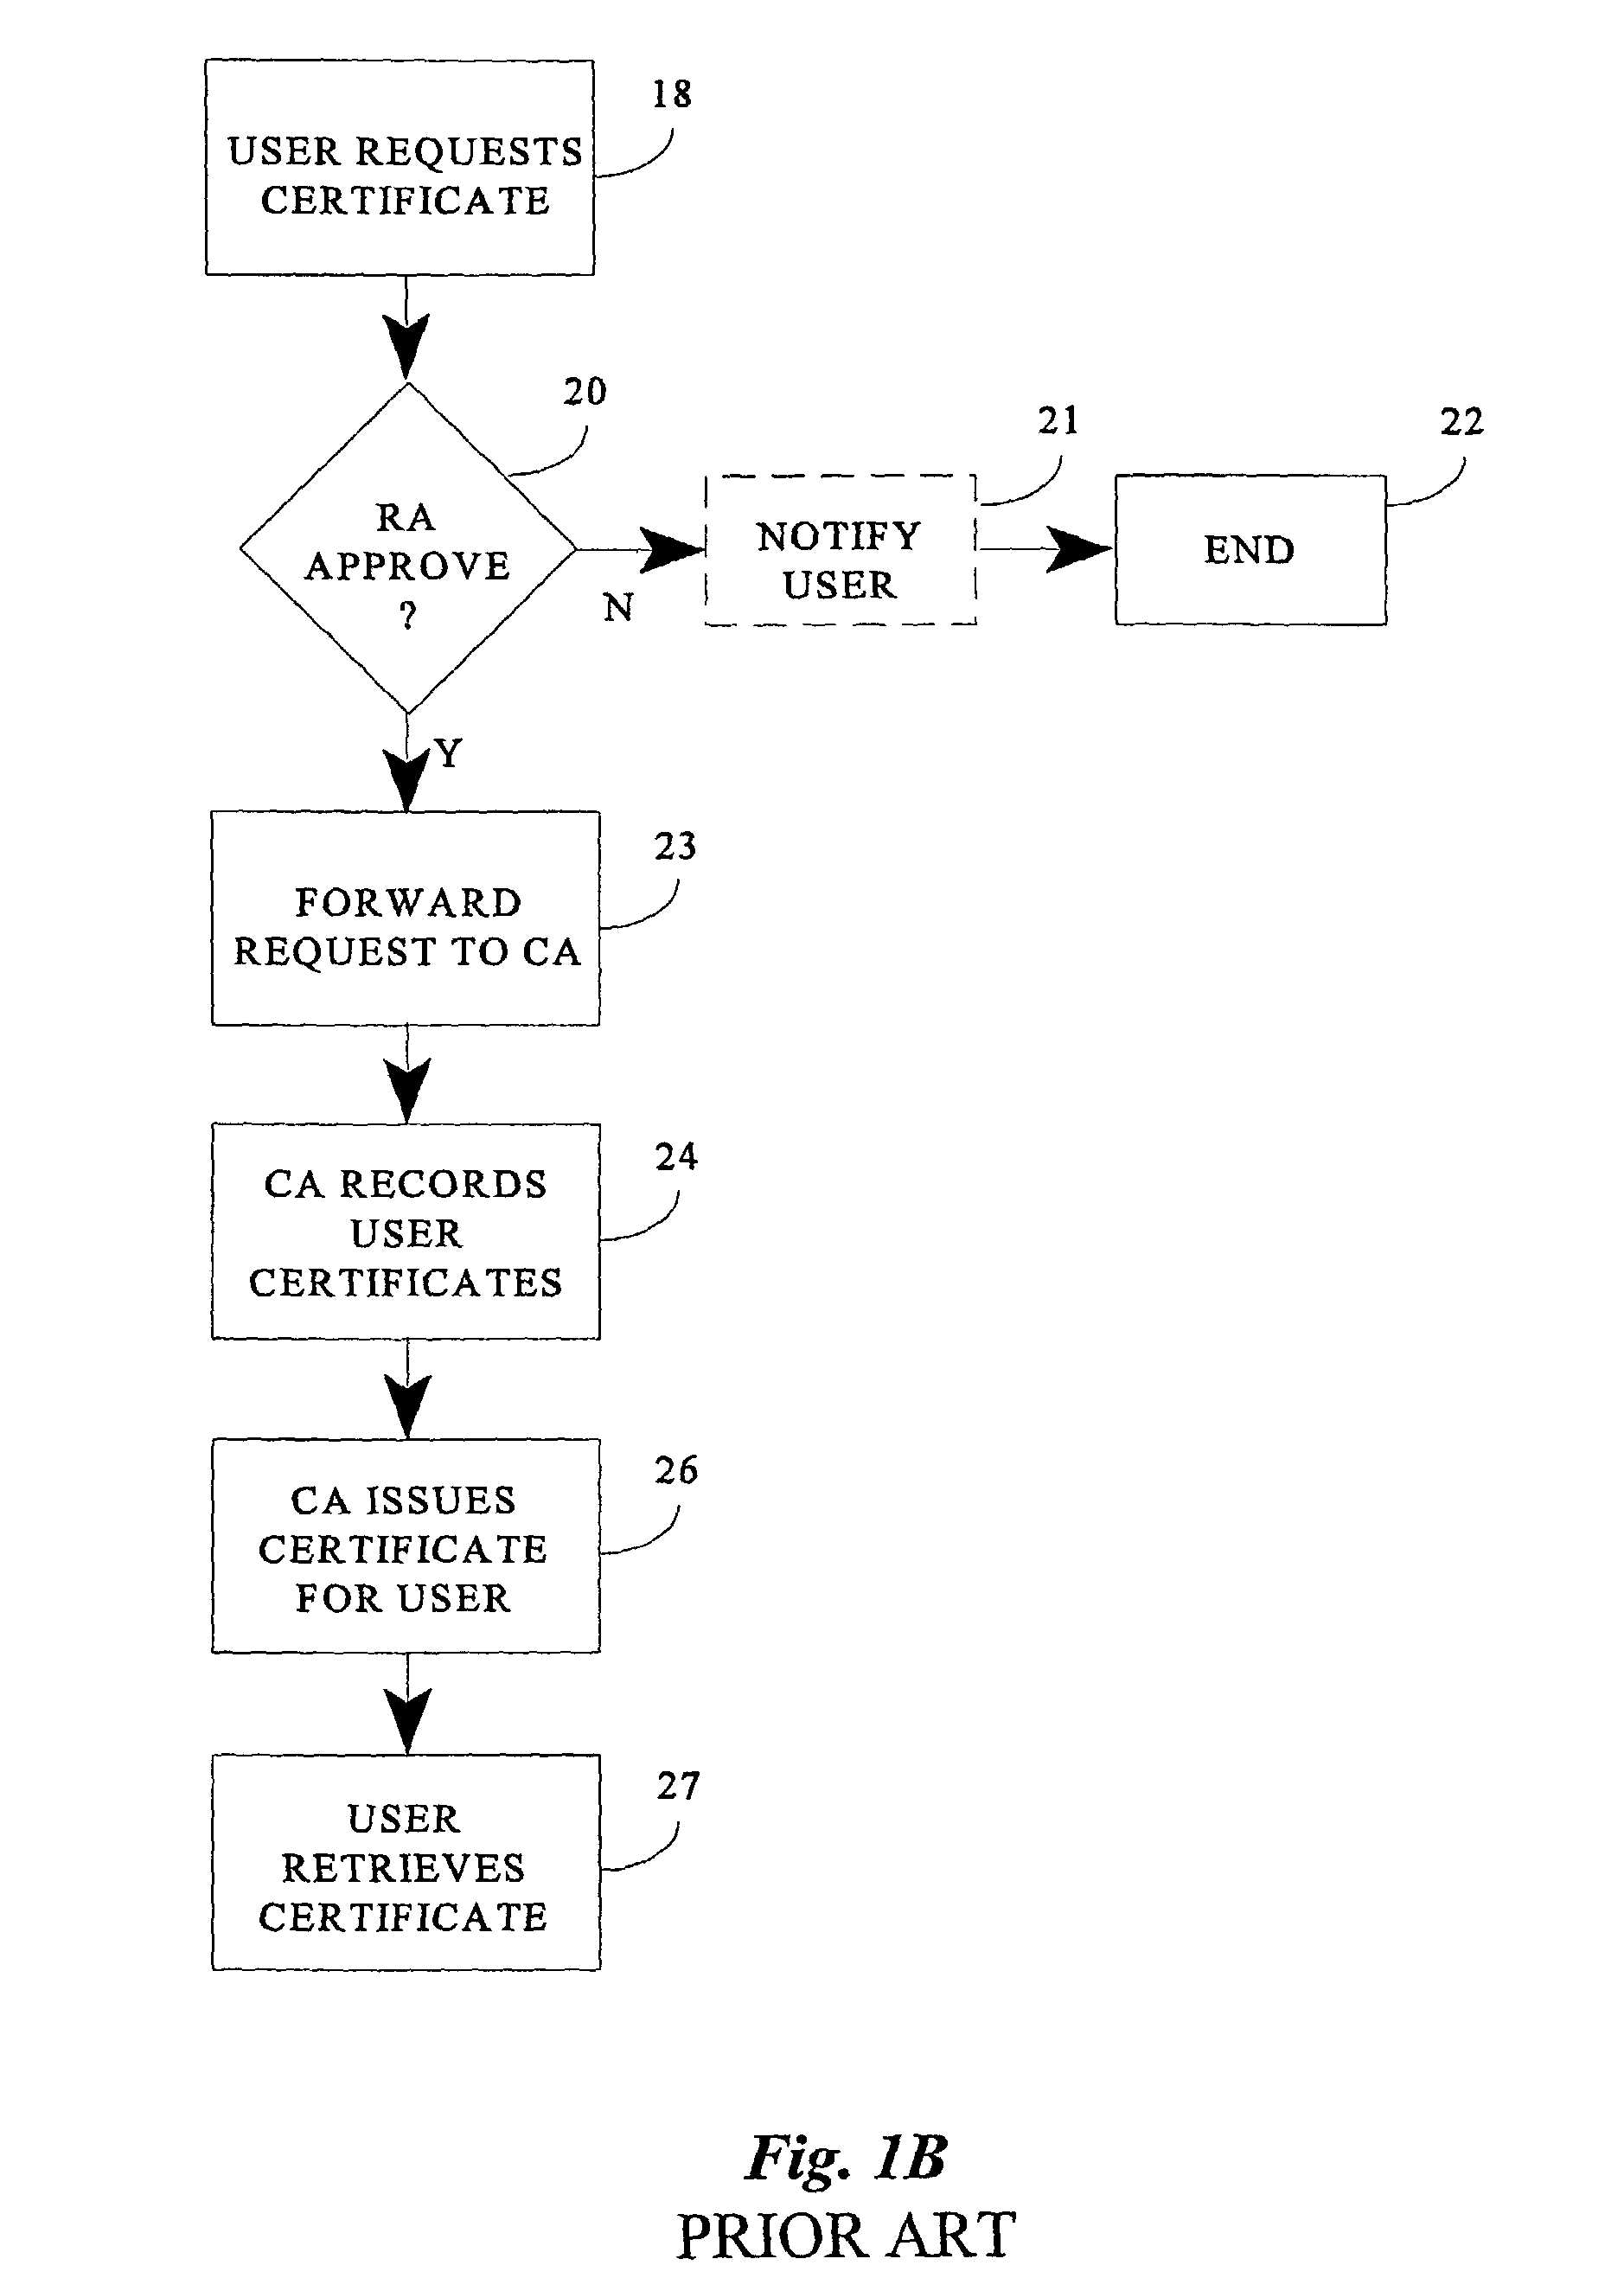 System and method for creating a trusted network capable of facilitating secure open network transactions using batch credentials